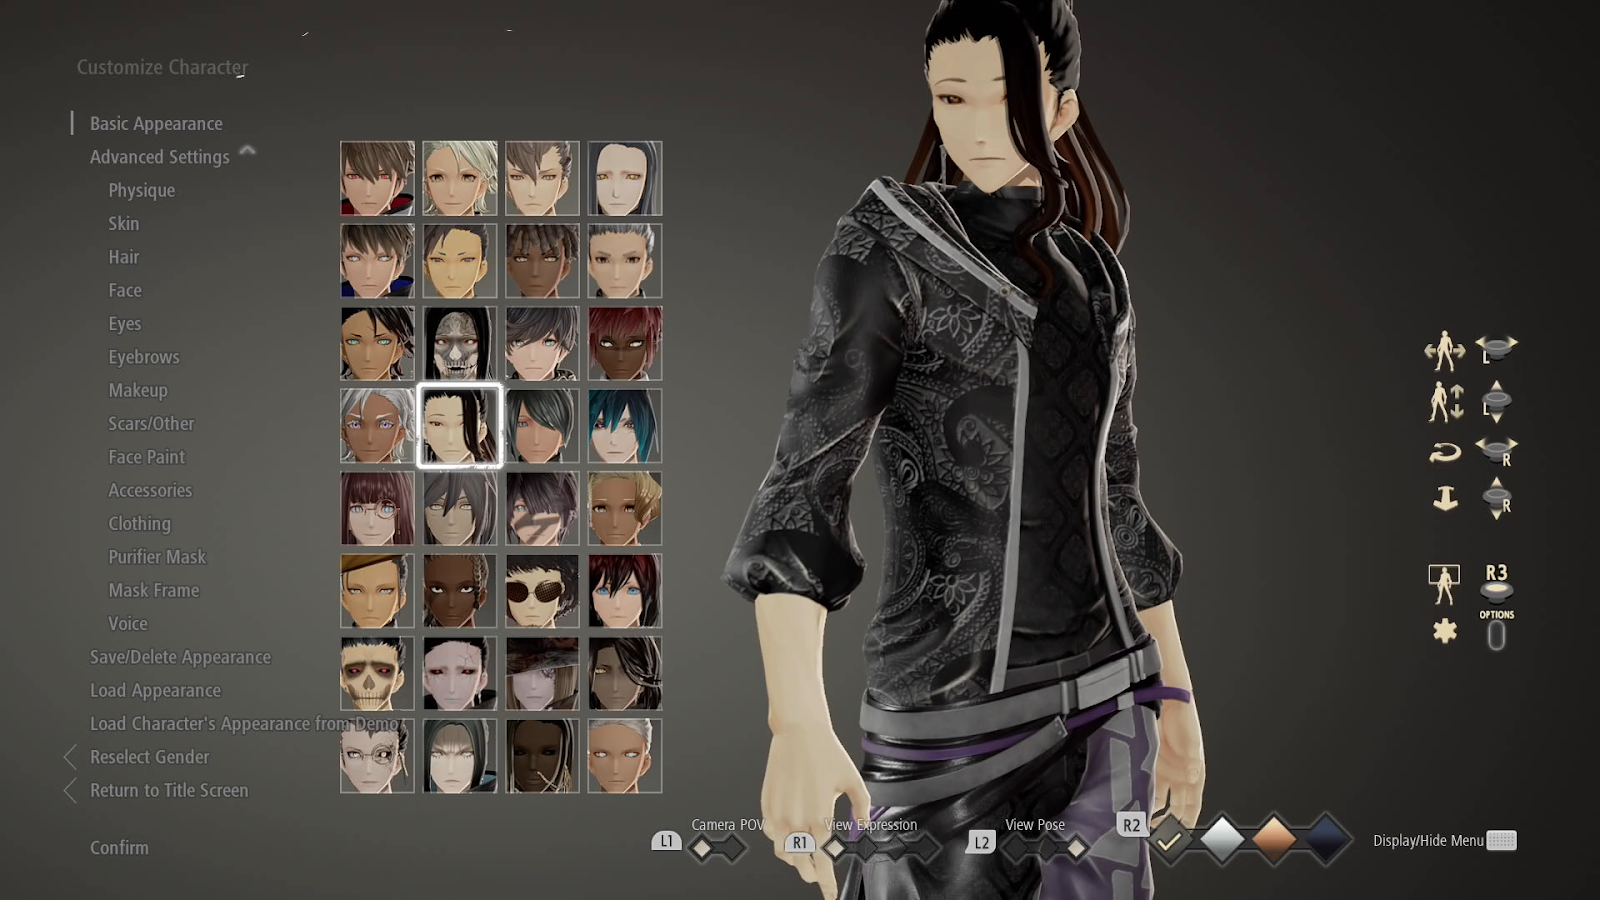 Code Vein S Character Creation Has All The Options